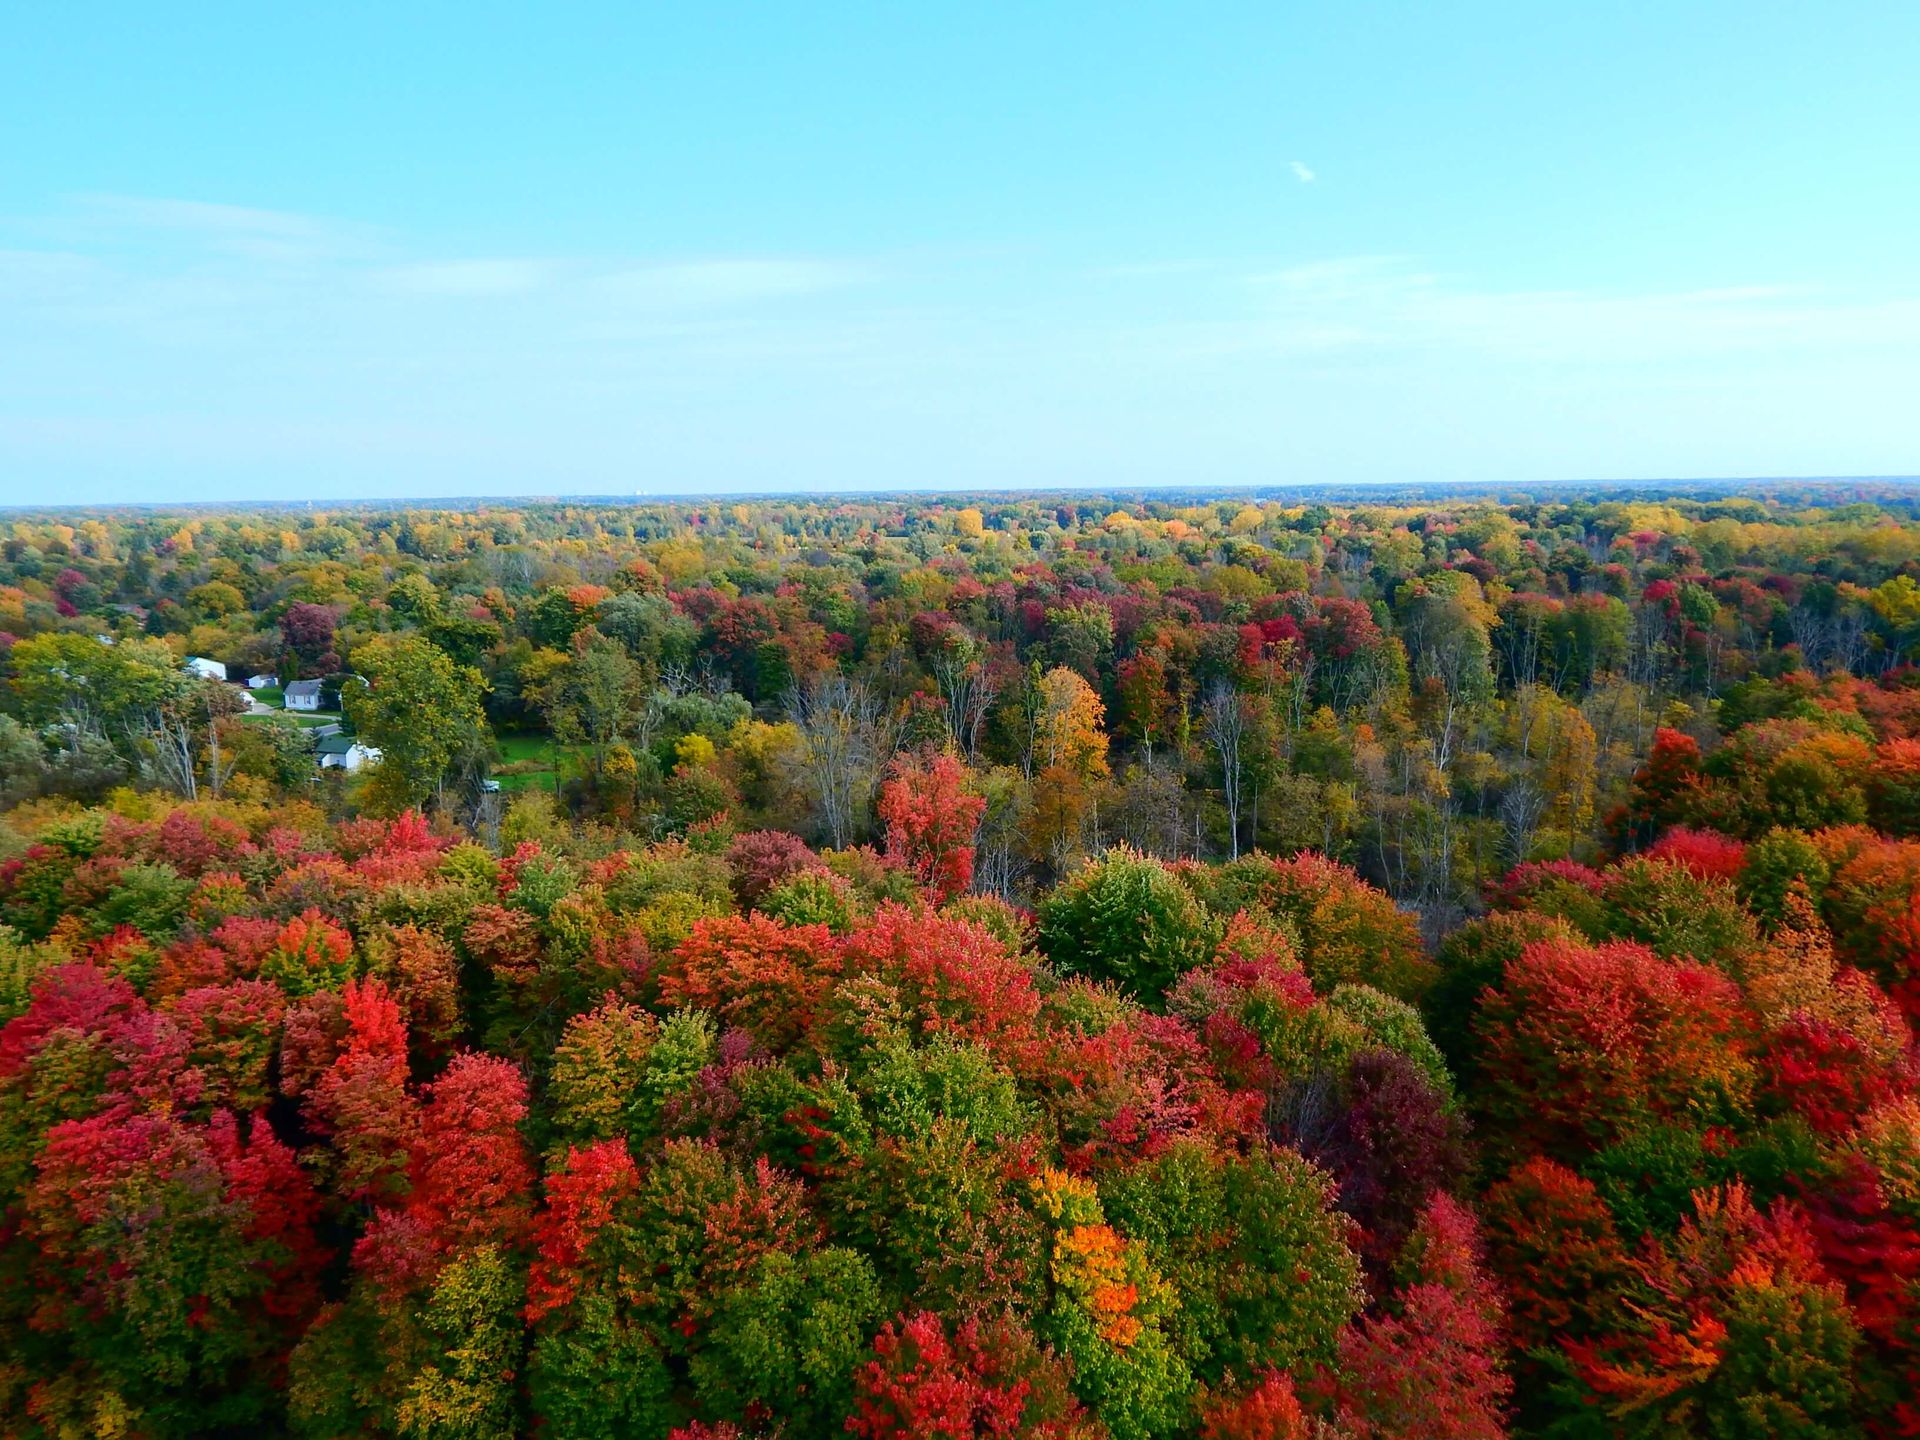 An aerial view of a forest with red and green trees.